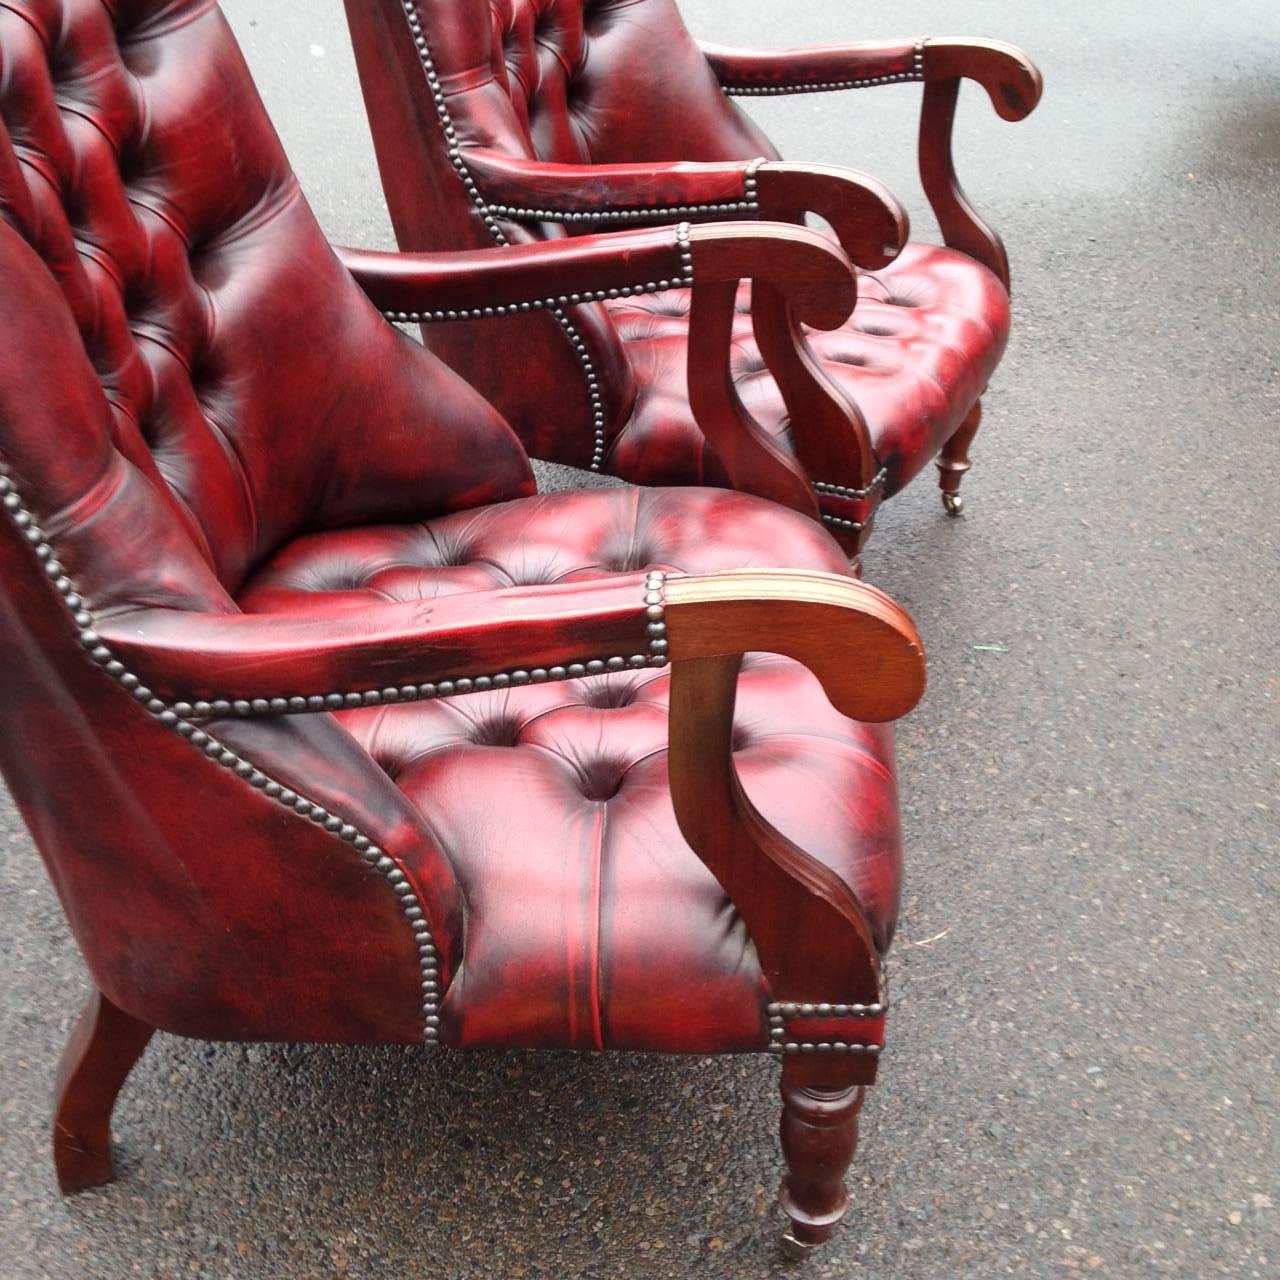 Pair of William IV mahogany and tufted red leather library chairs, circa 1850 with sloping backs, open Curule arms and turned front legs ending in casters. Fine patina and slight color difference on the arms due to wear. 
 Seat height: 14” 22”